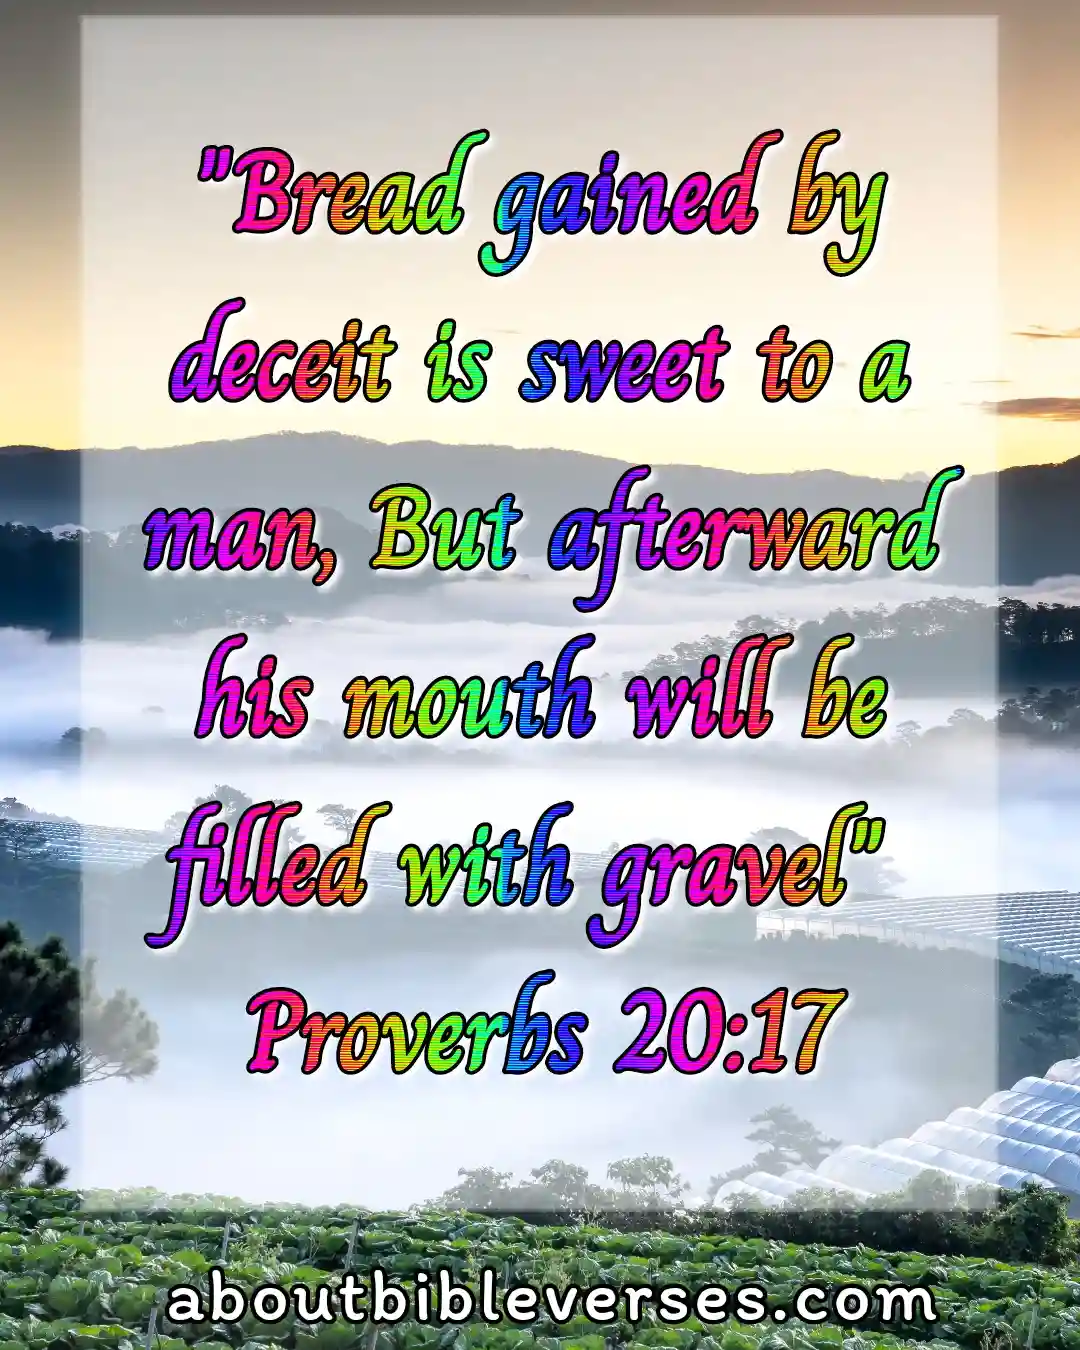 Bible Verses For scammer, Fraud And Misleading (Proverbs 20:17)